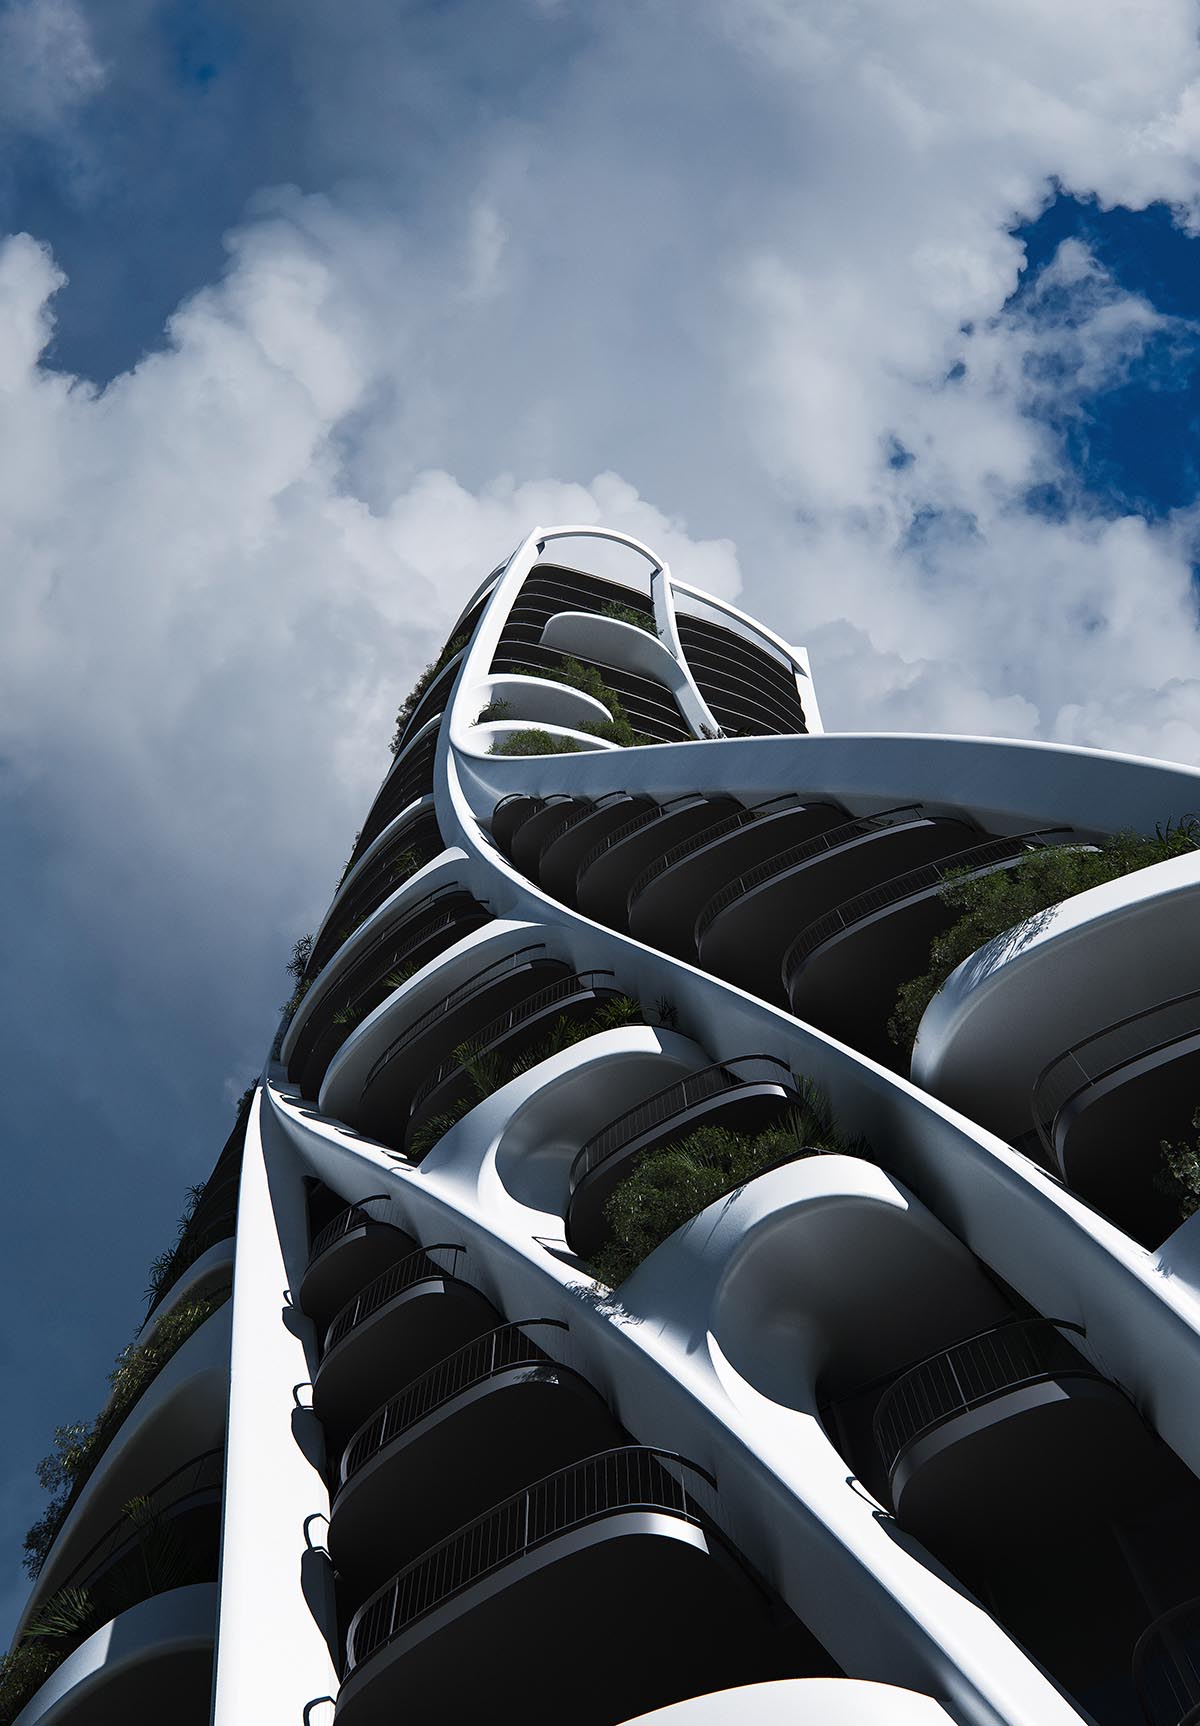 MAD unveils its twisting mixed-use Qondesa tower, set to become Quito’s tallest building